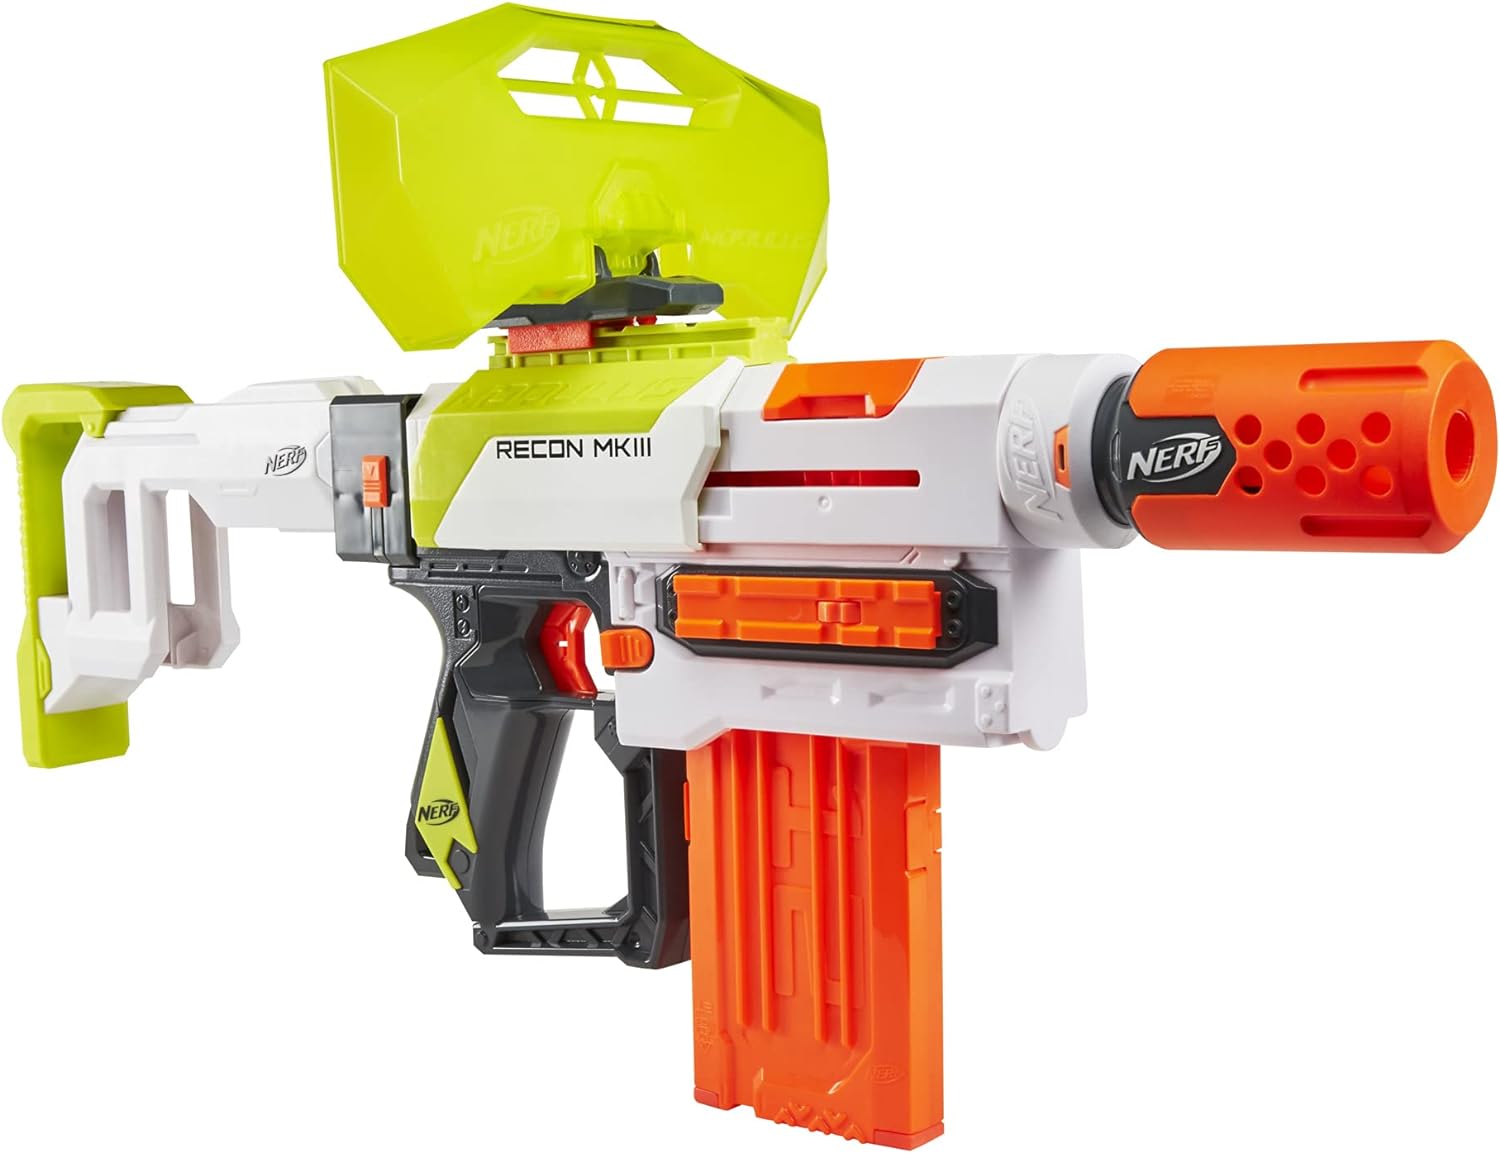 Gift for my son who loves nerf guns. Works great. Some assembly is required.